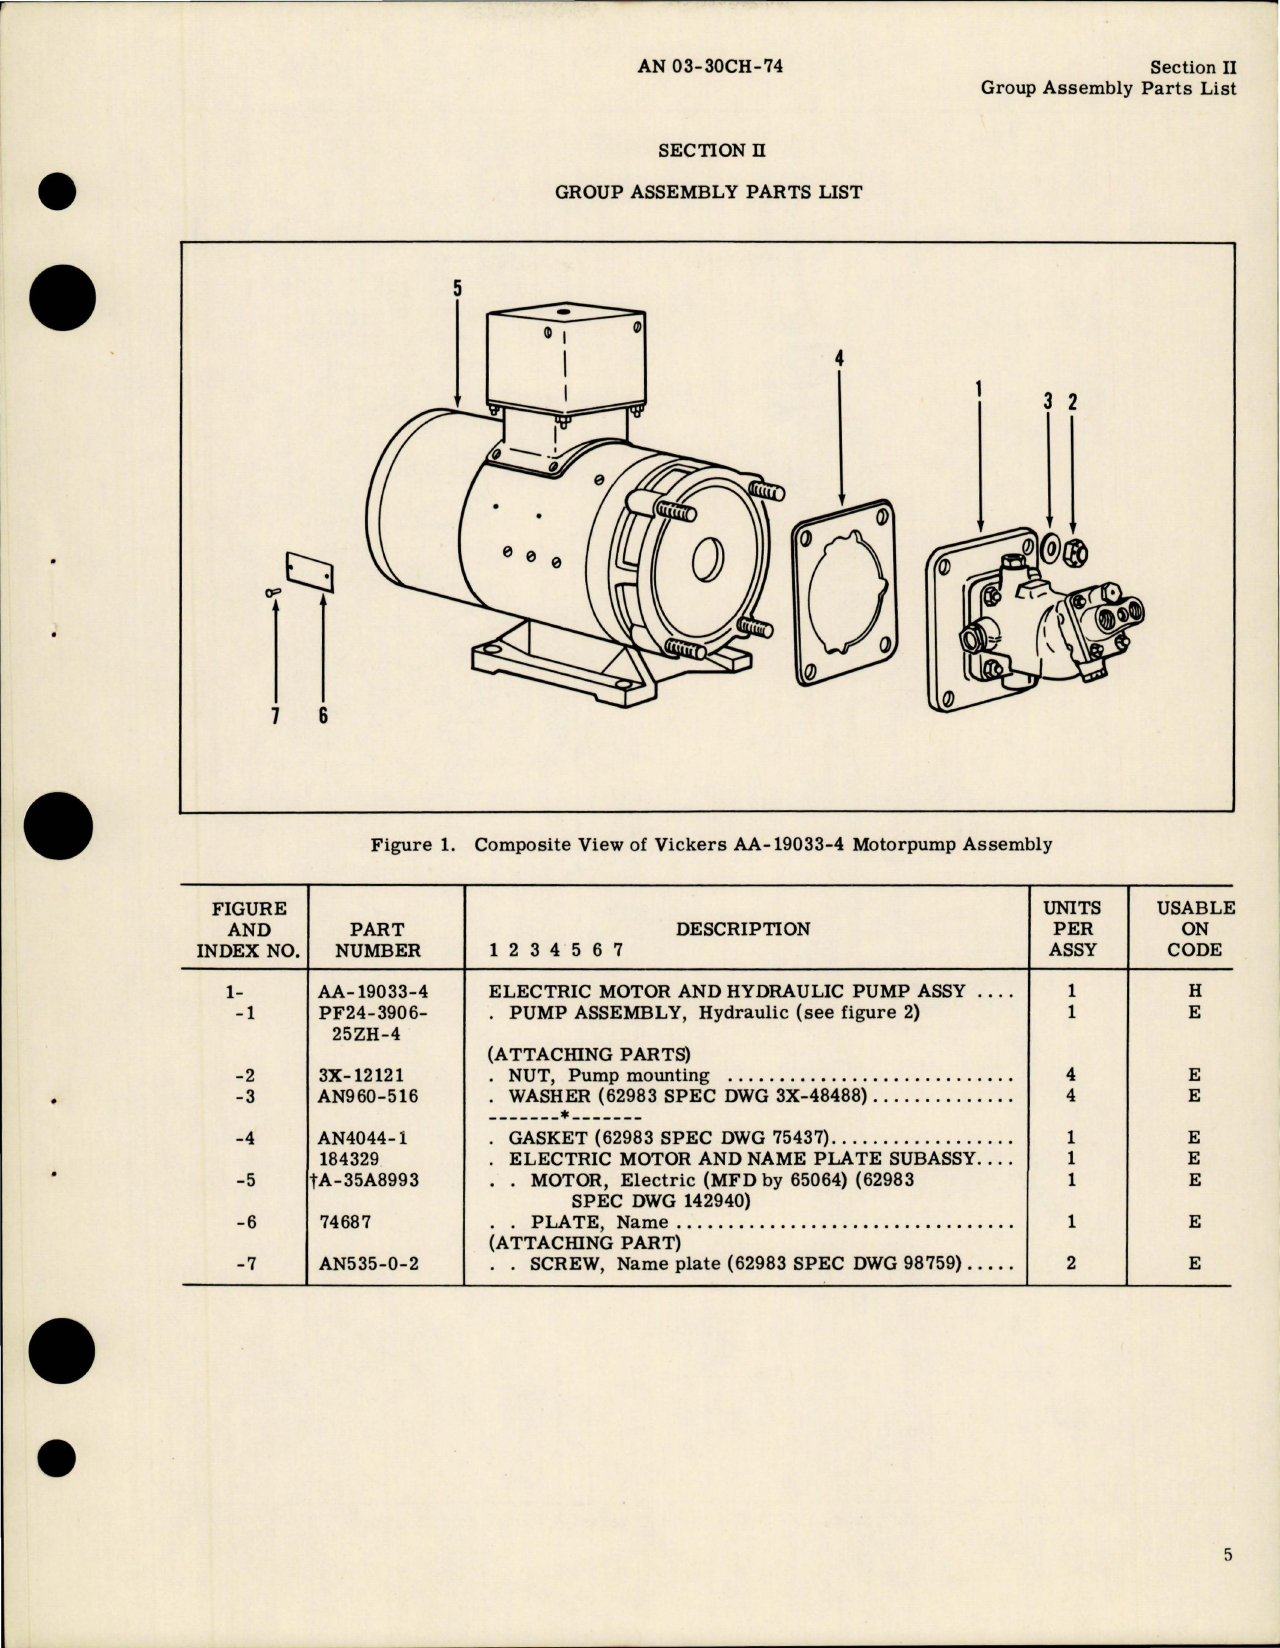 Sample page 7 from AirCorps Library document: Illustrated Parts Breakdown for Hydraulic Pump Assemblies